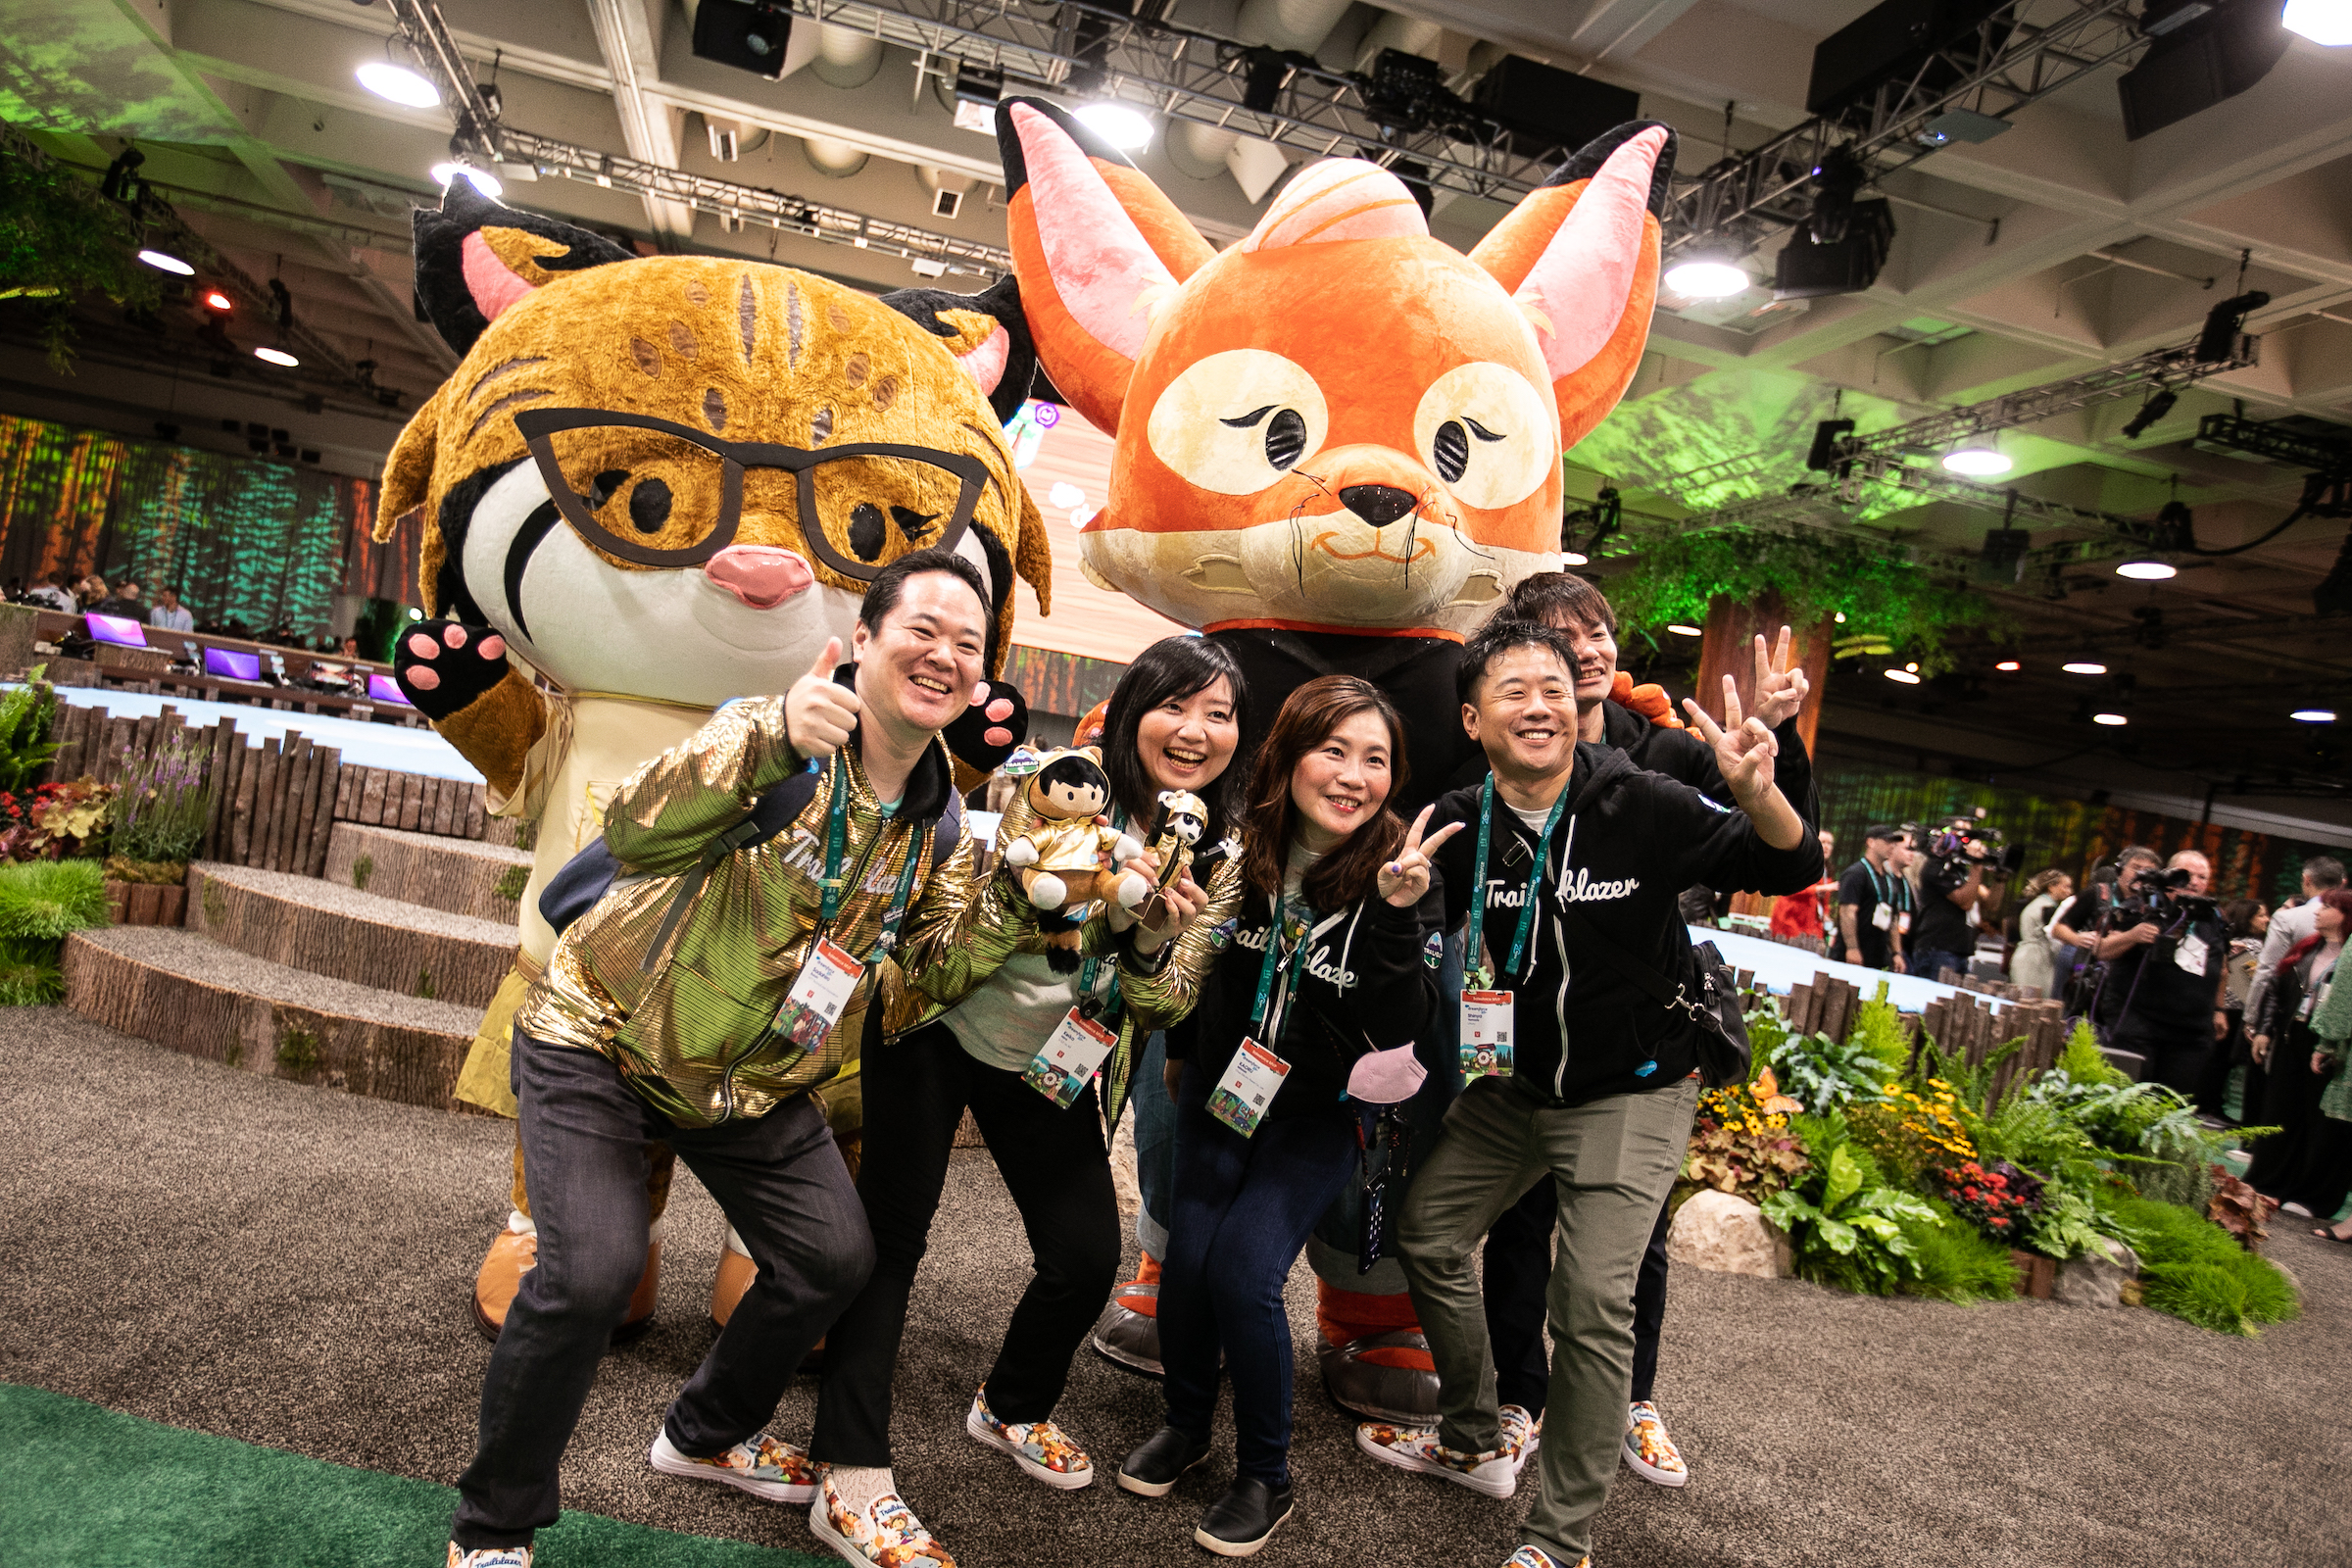 Several Dreamforce22 attendees pose for a photo with Appy the AppExchange mascot.